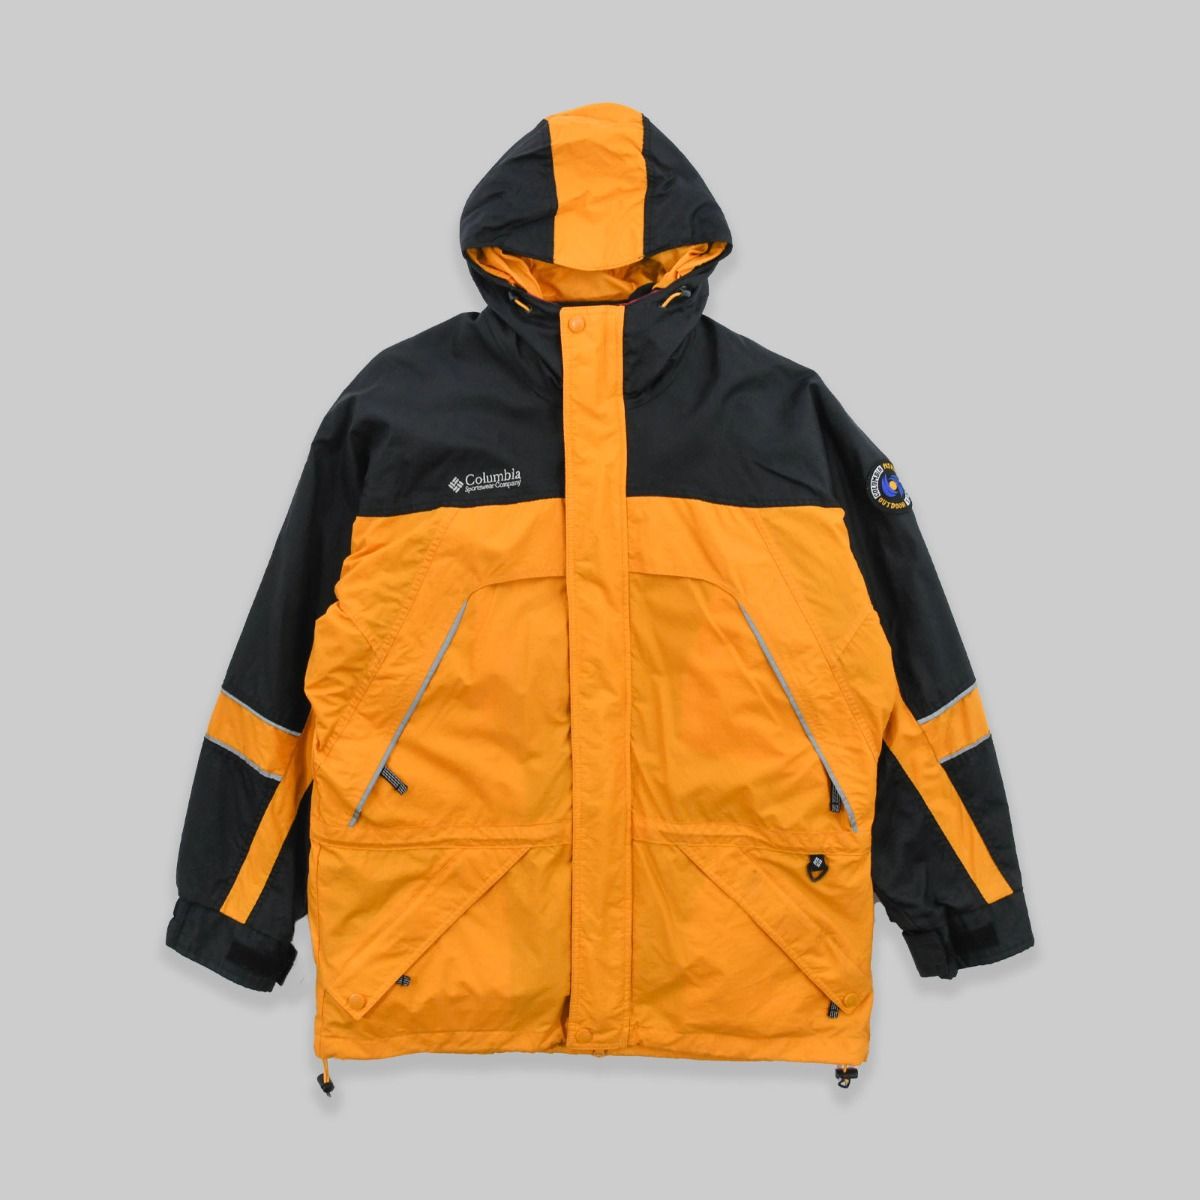 Columbia 1990s 2 in 1 Jacket